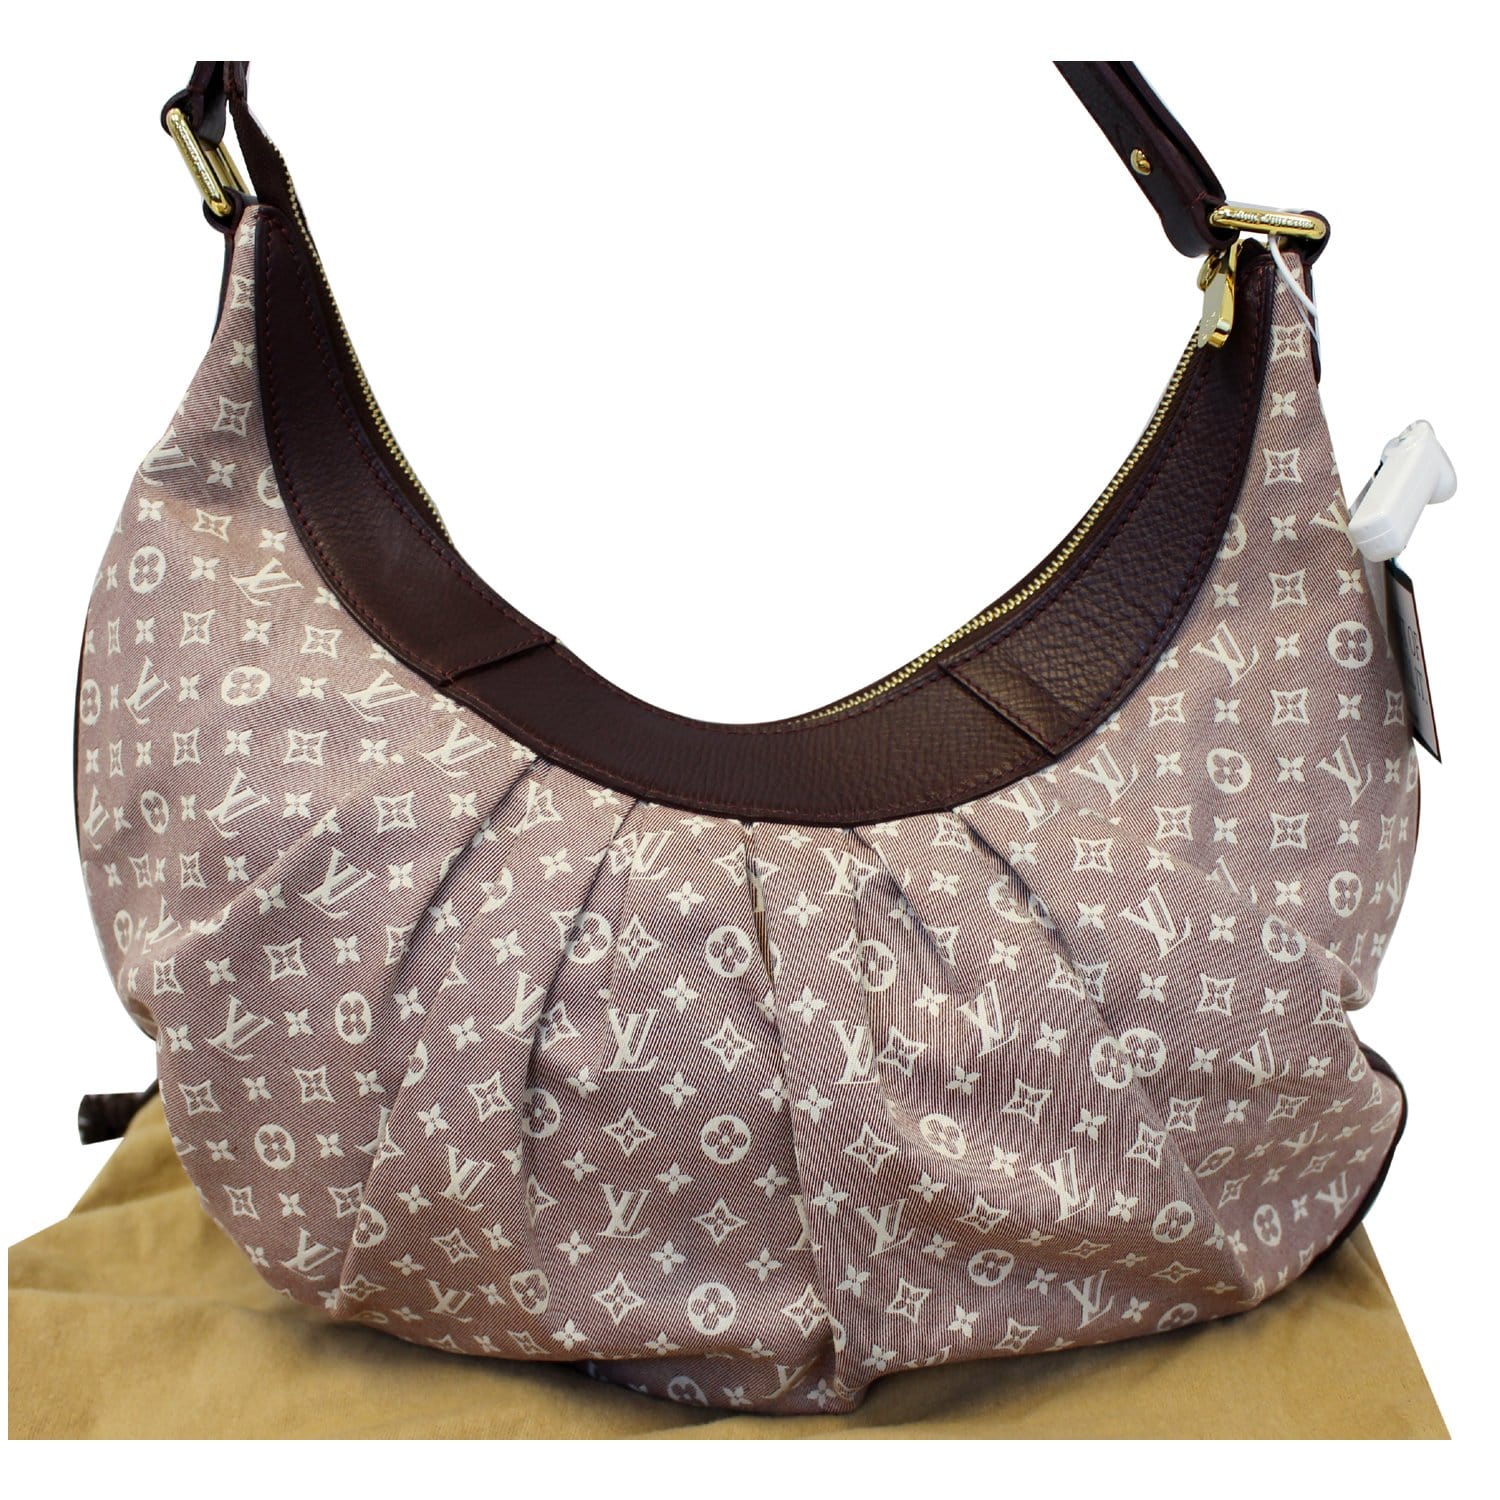 SOLD OUT - Excellent Condition Brown Minilin Monogram Idylle